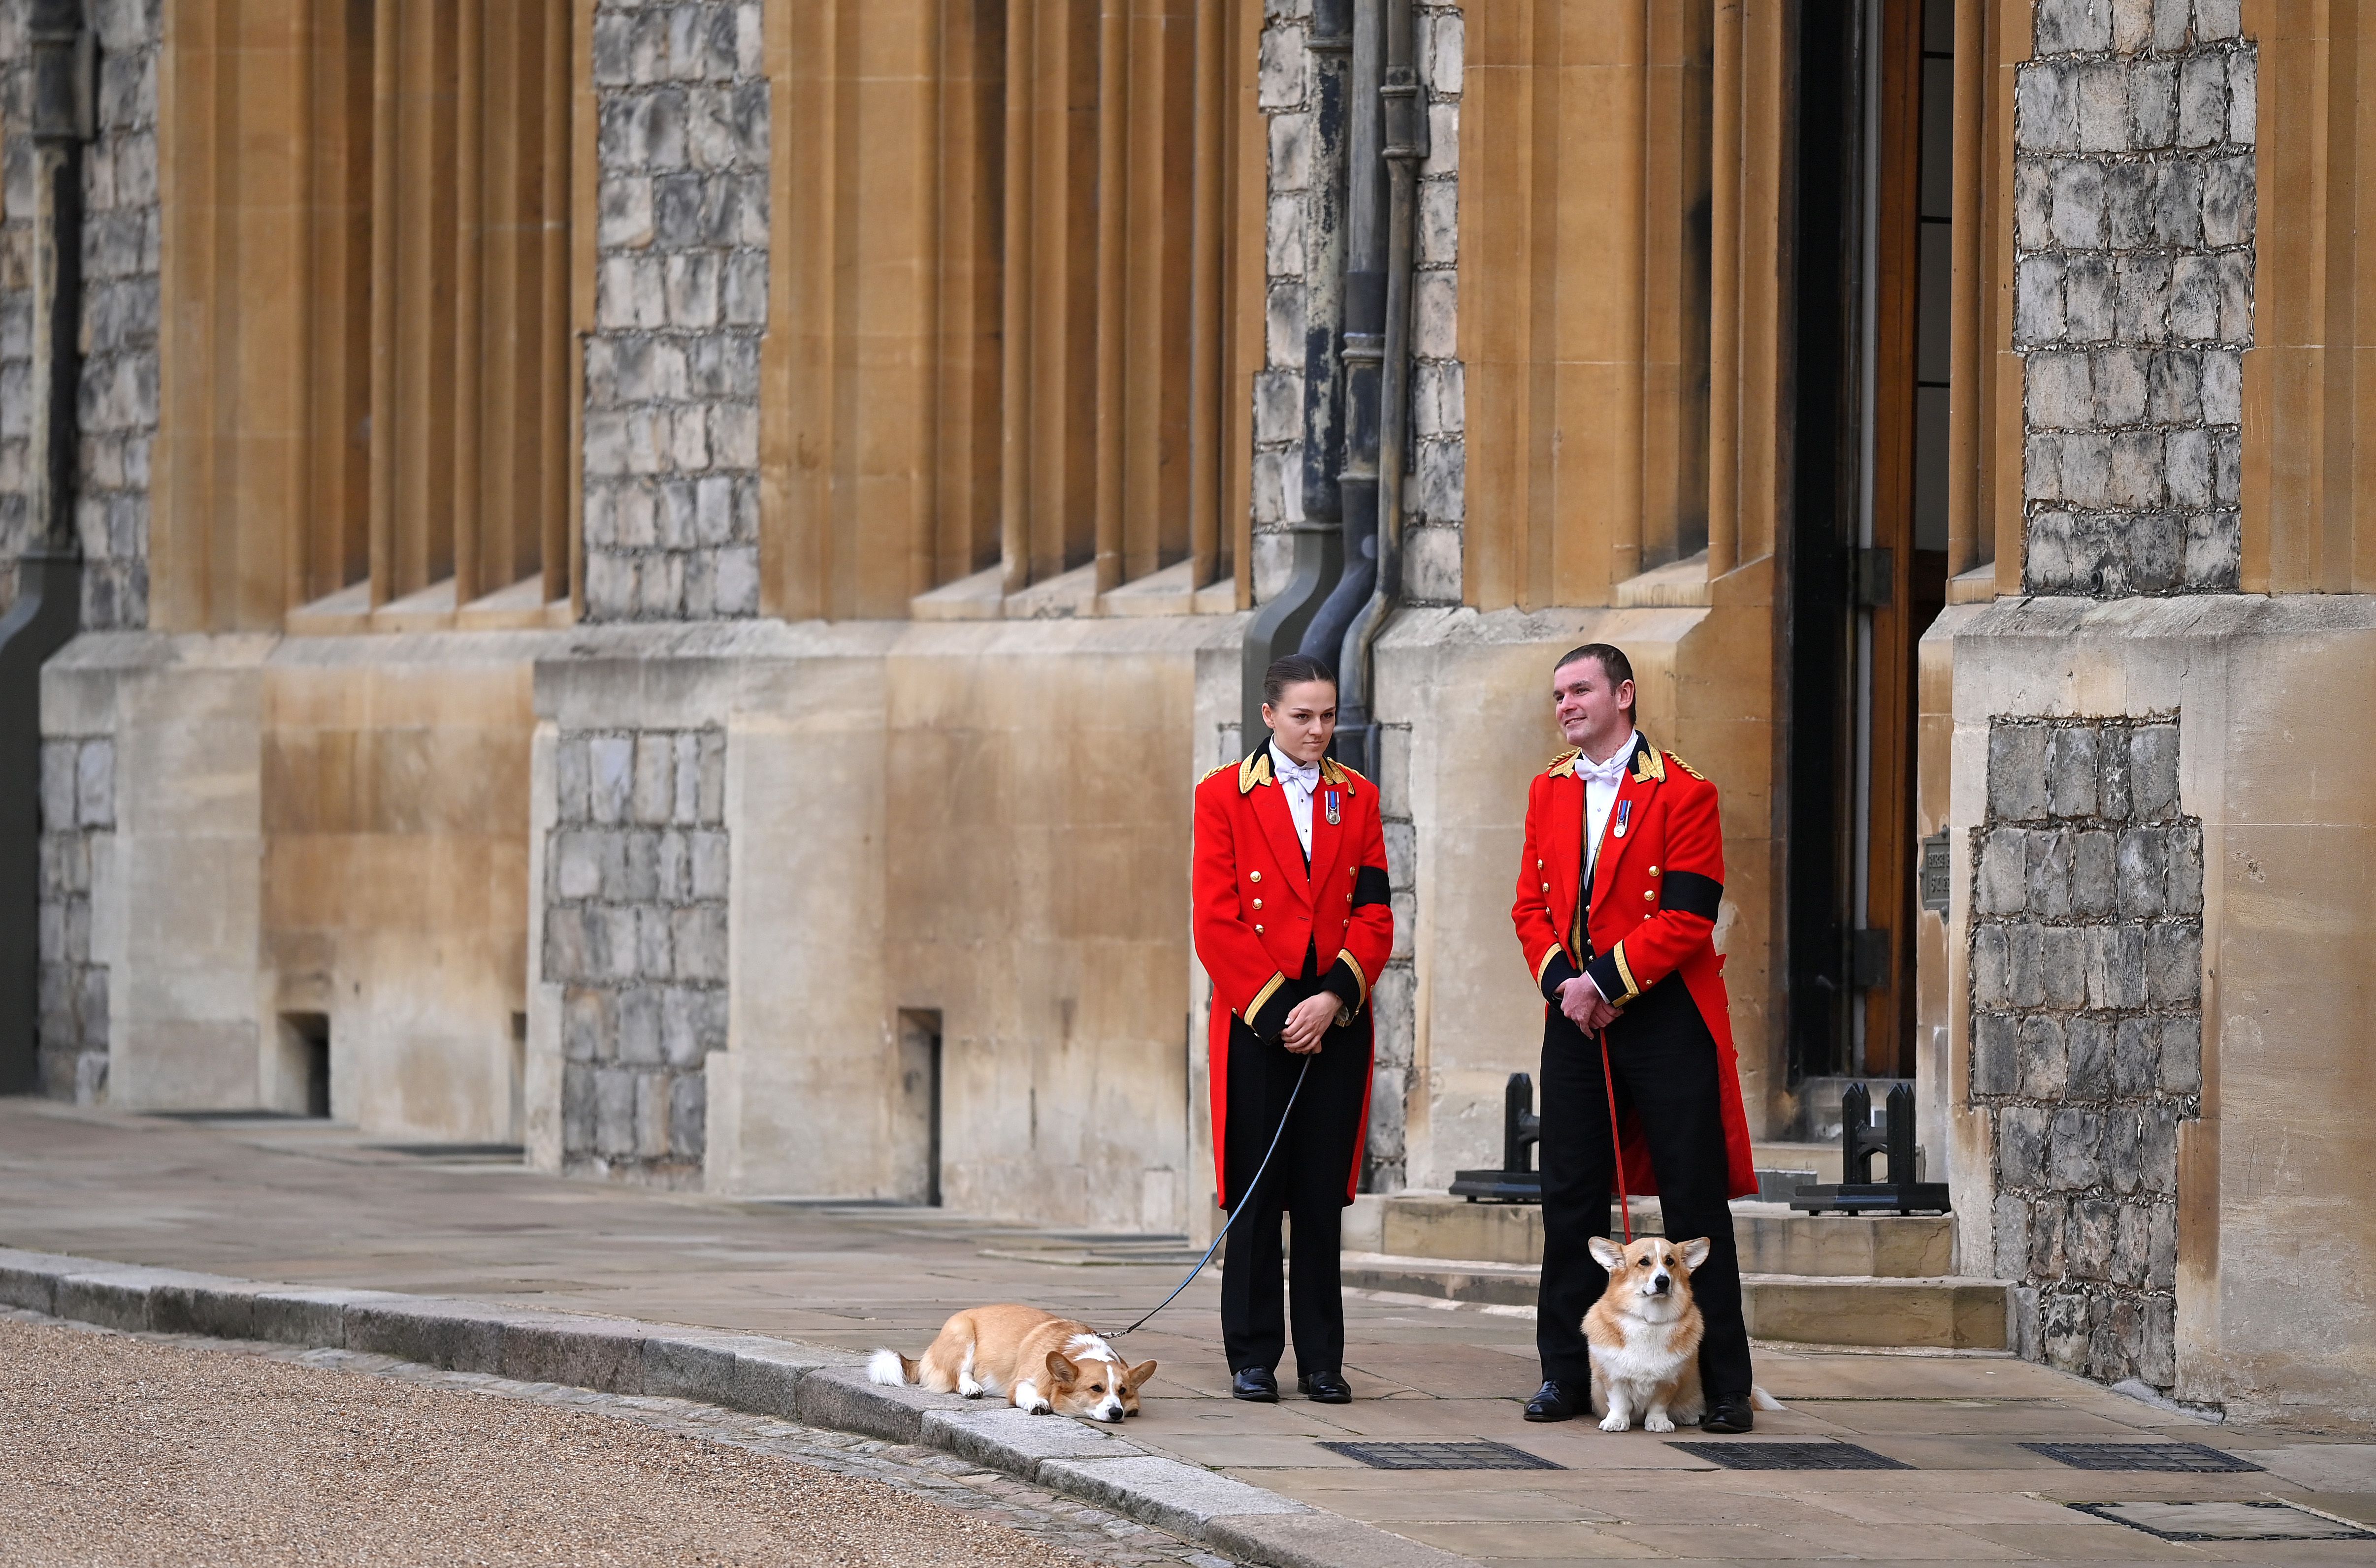 Members of the Royal Household walking corgis near the service at Windsor Castle.